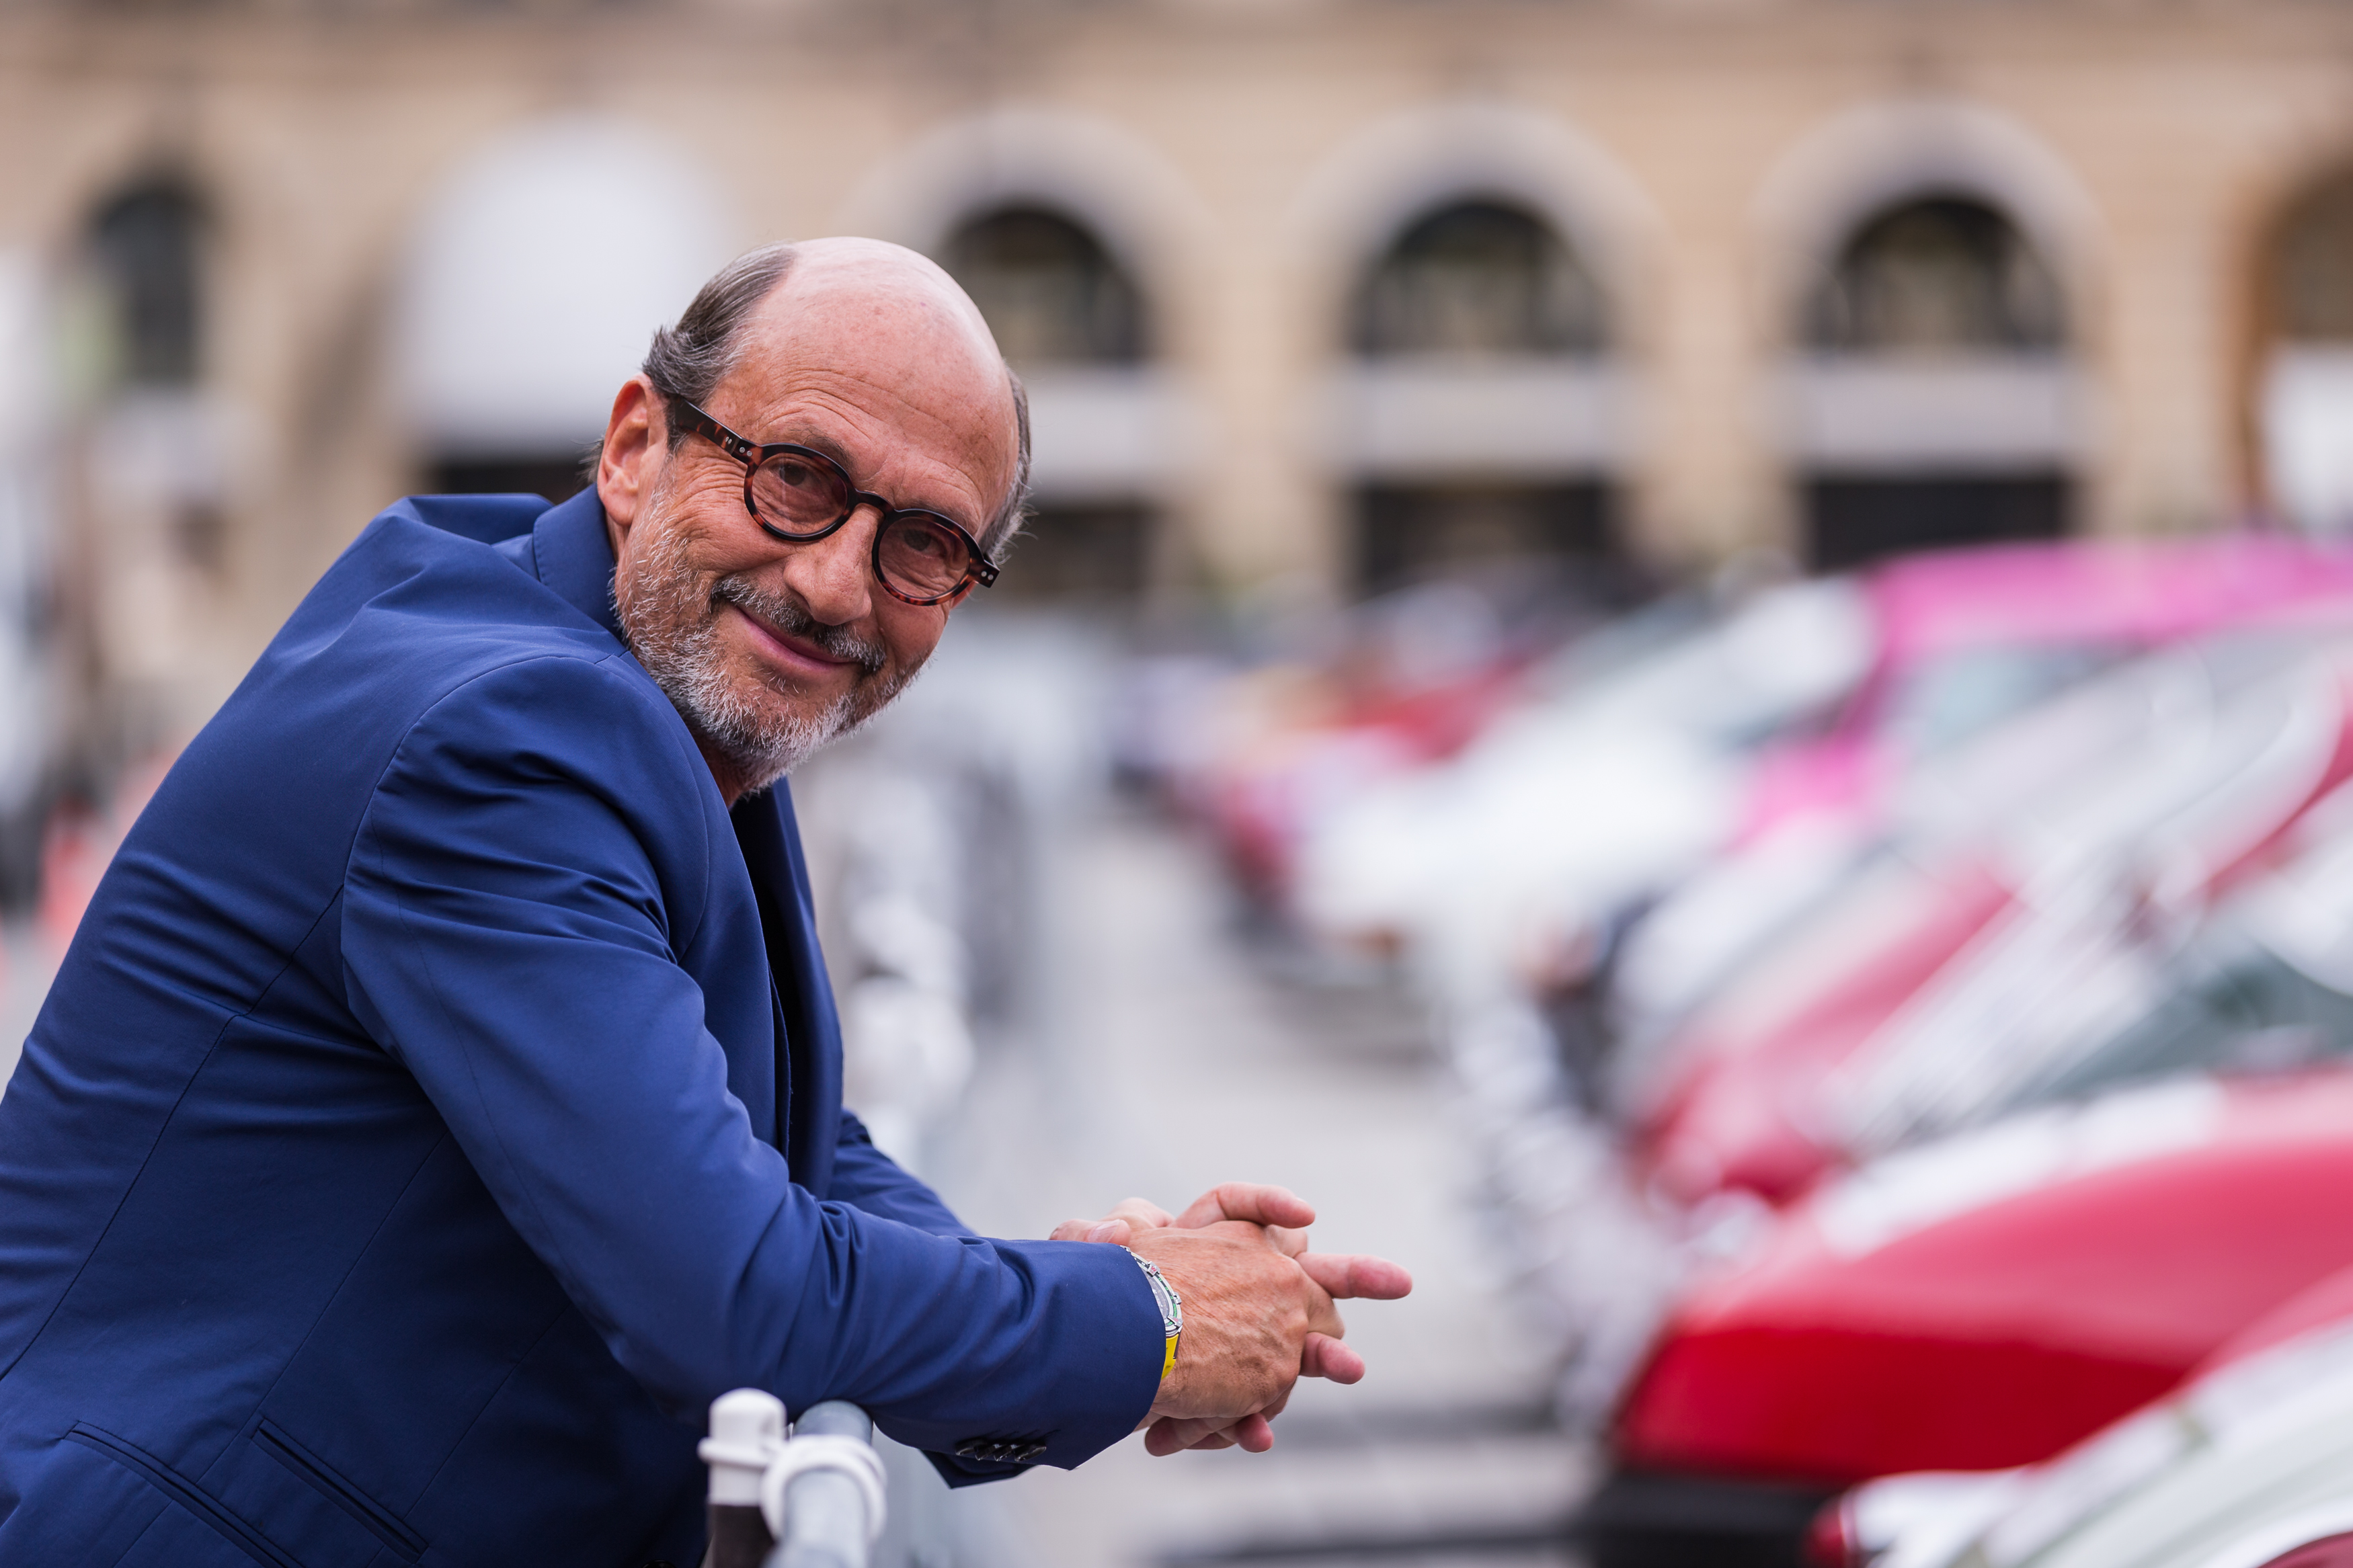 Richard Mille, CEO of Richard Mille by Richard Bord